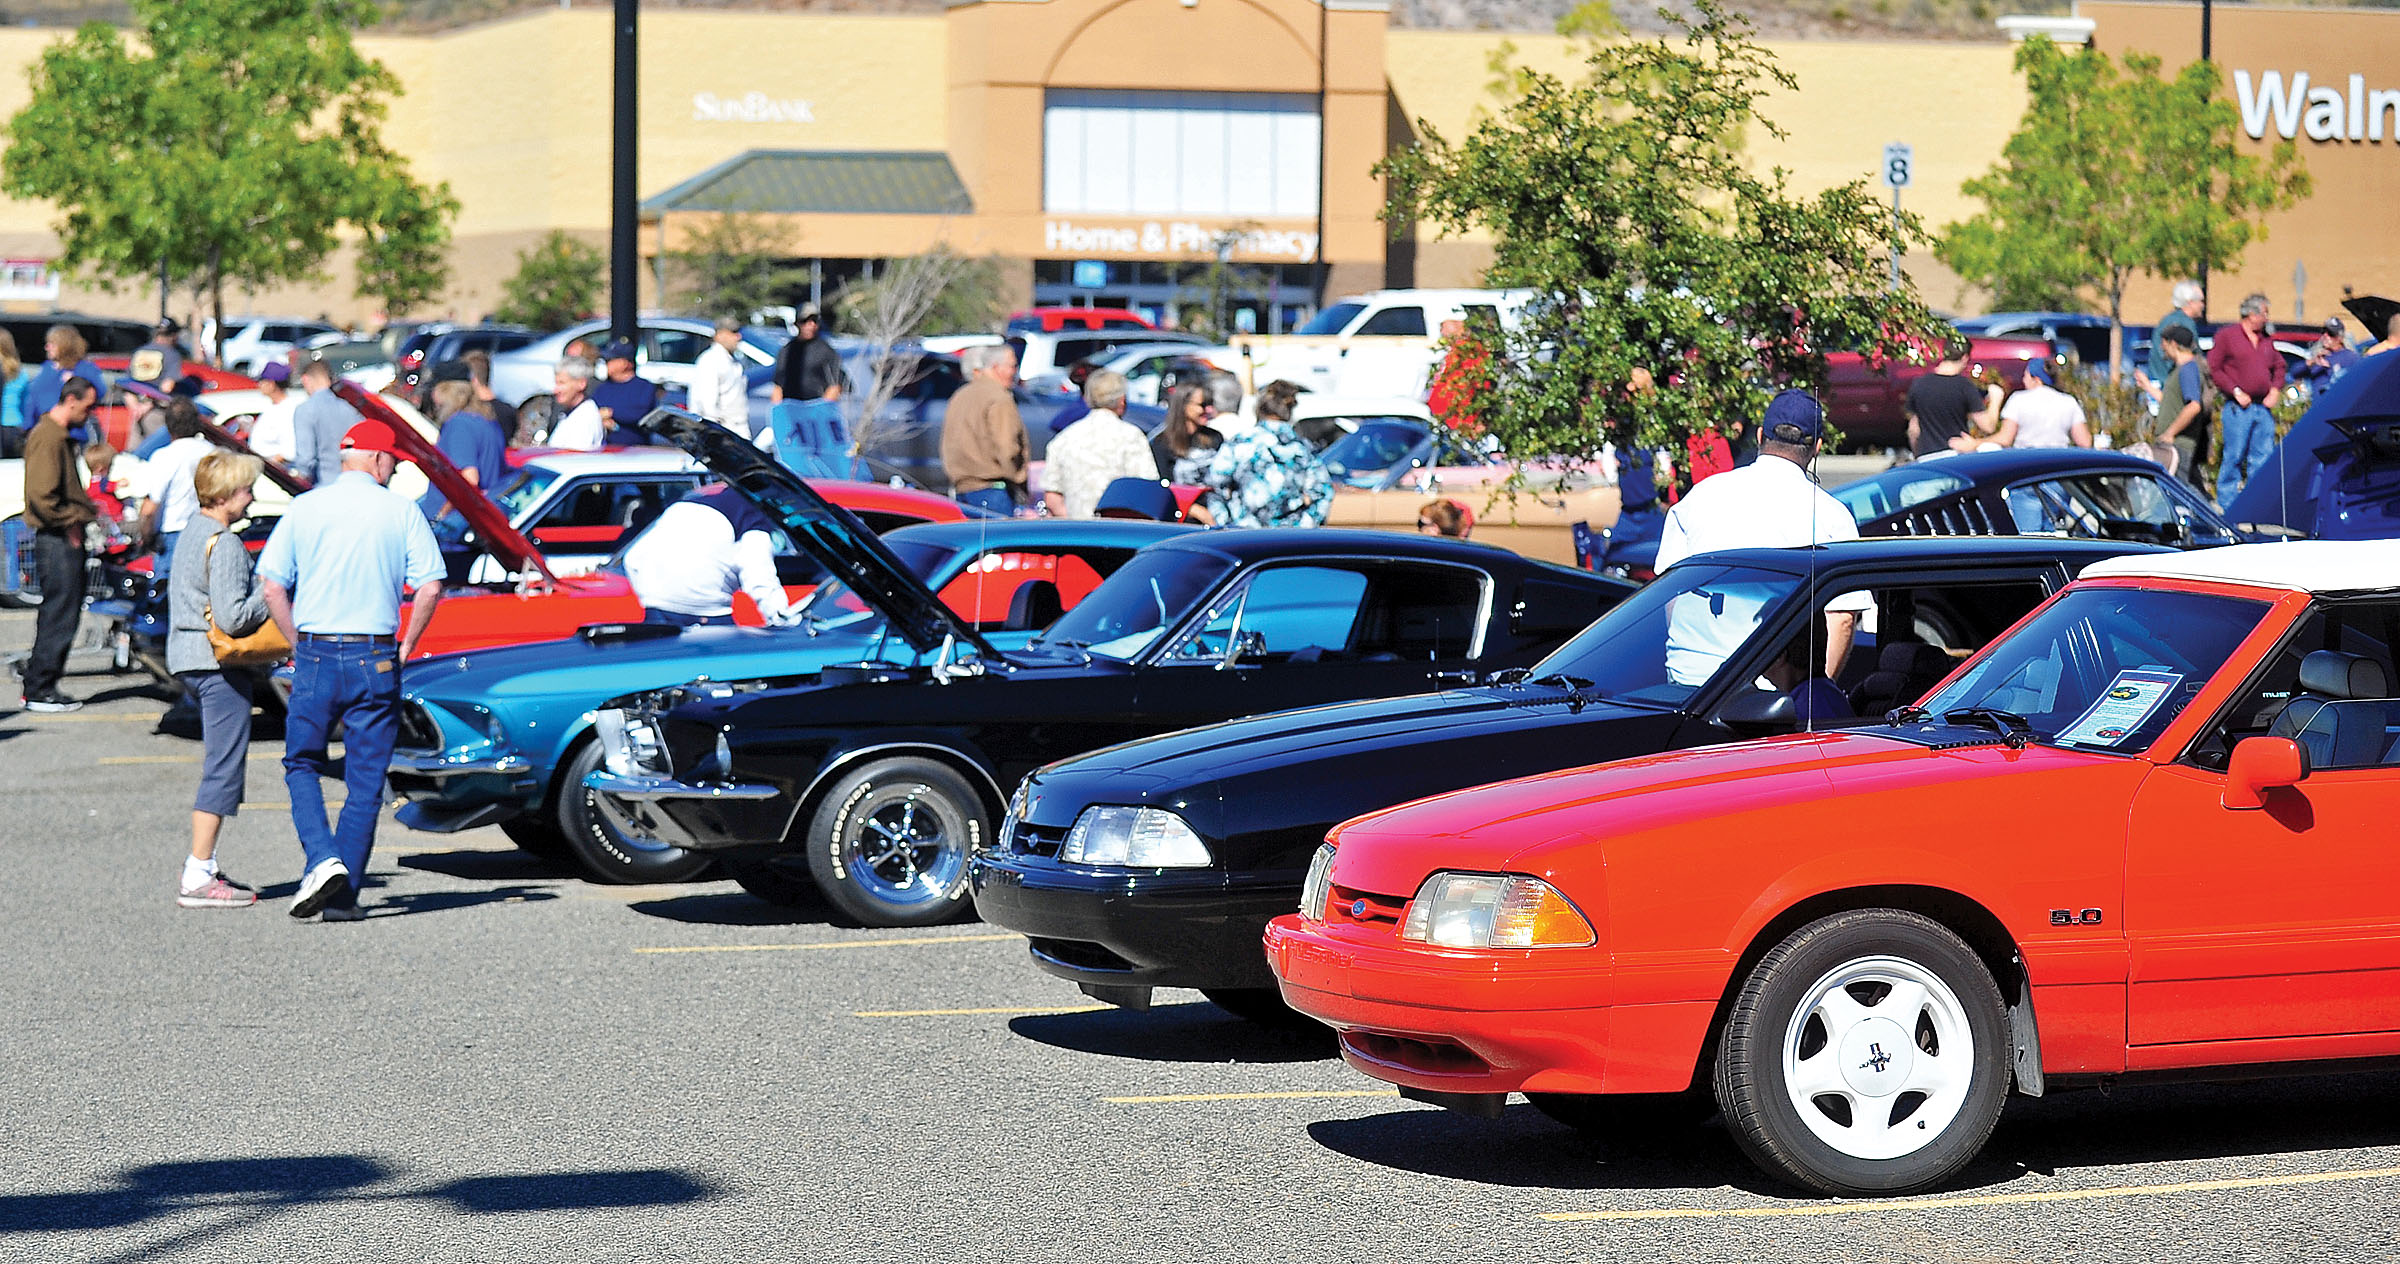 Bring your Mustang to the Pony Only Cruise Car Show, Oct. 5 The Daily